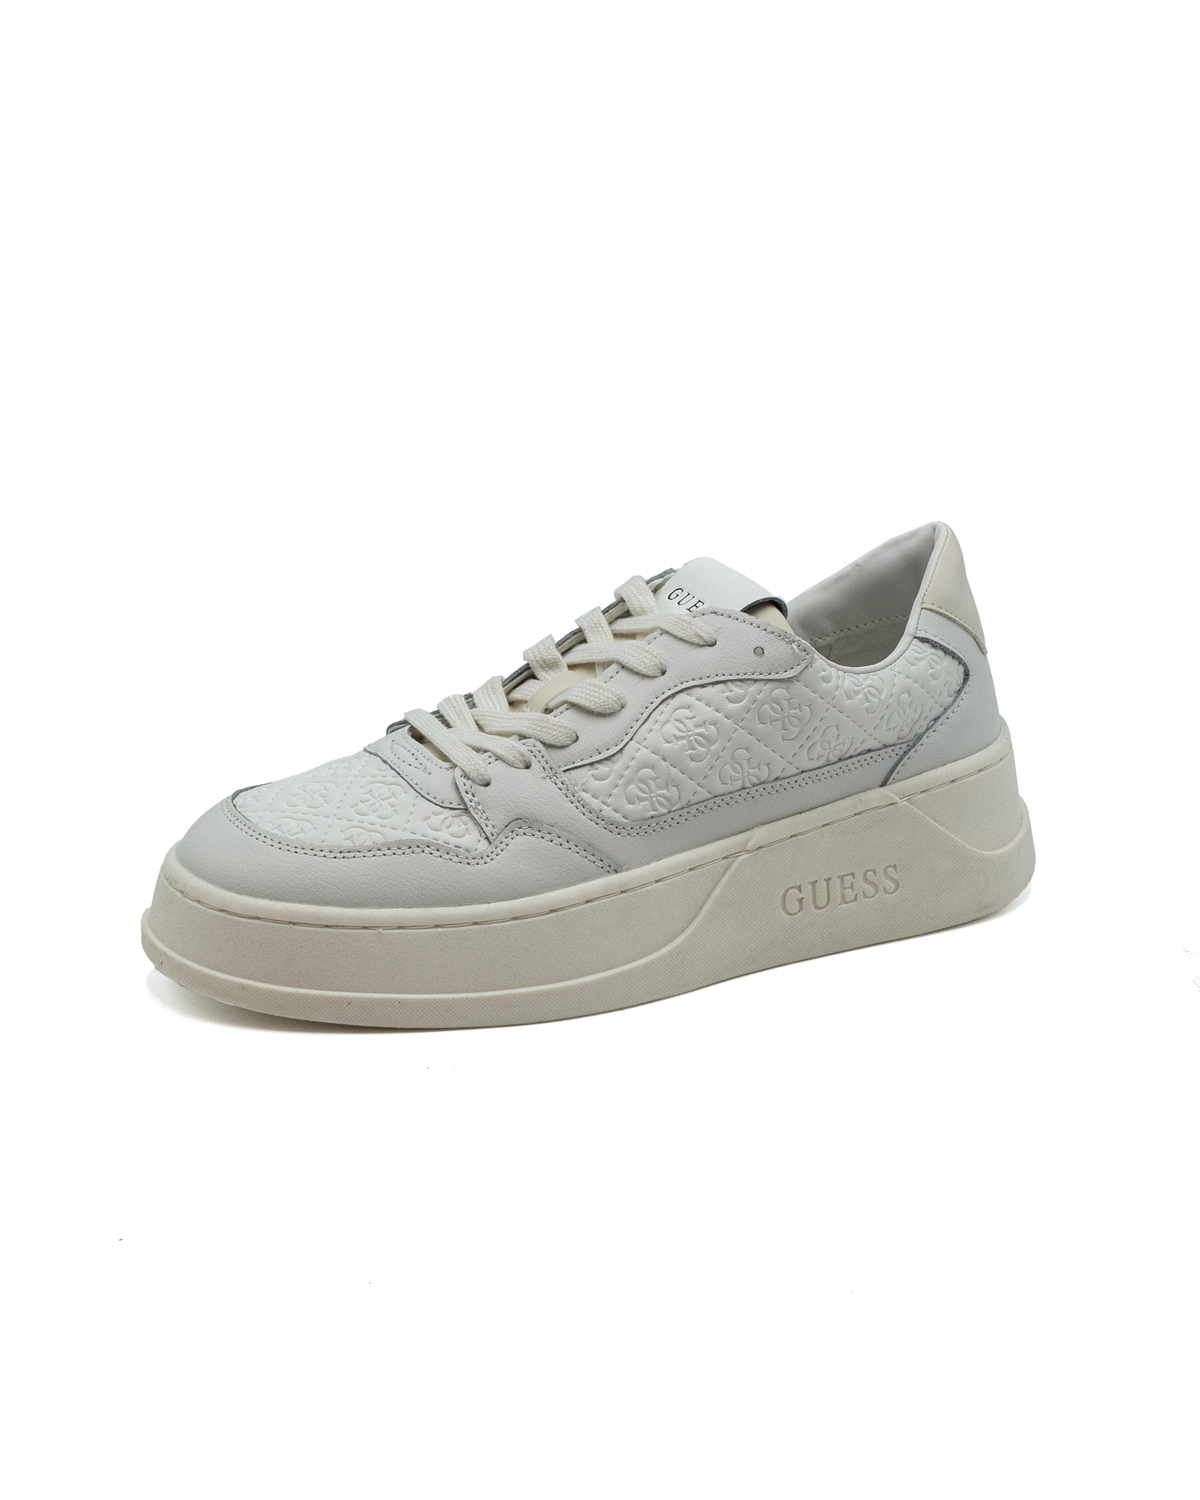 (image for) Sneakers Guess uomo bianche con logo 4G impresso